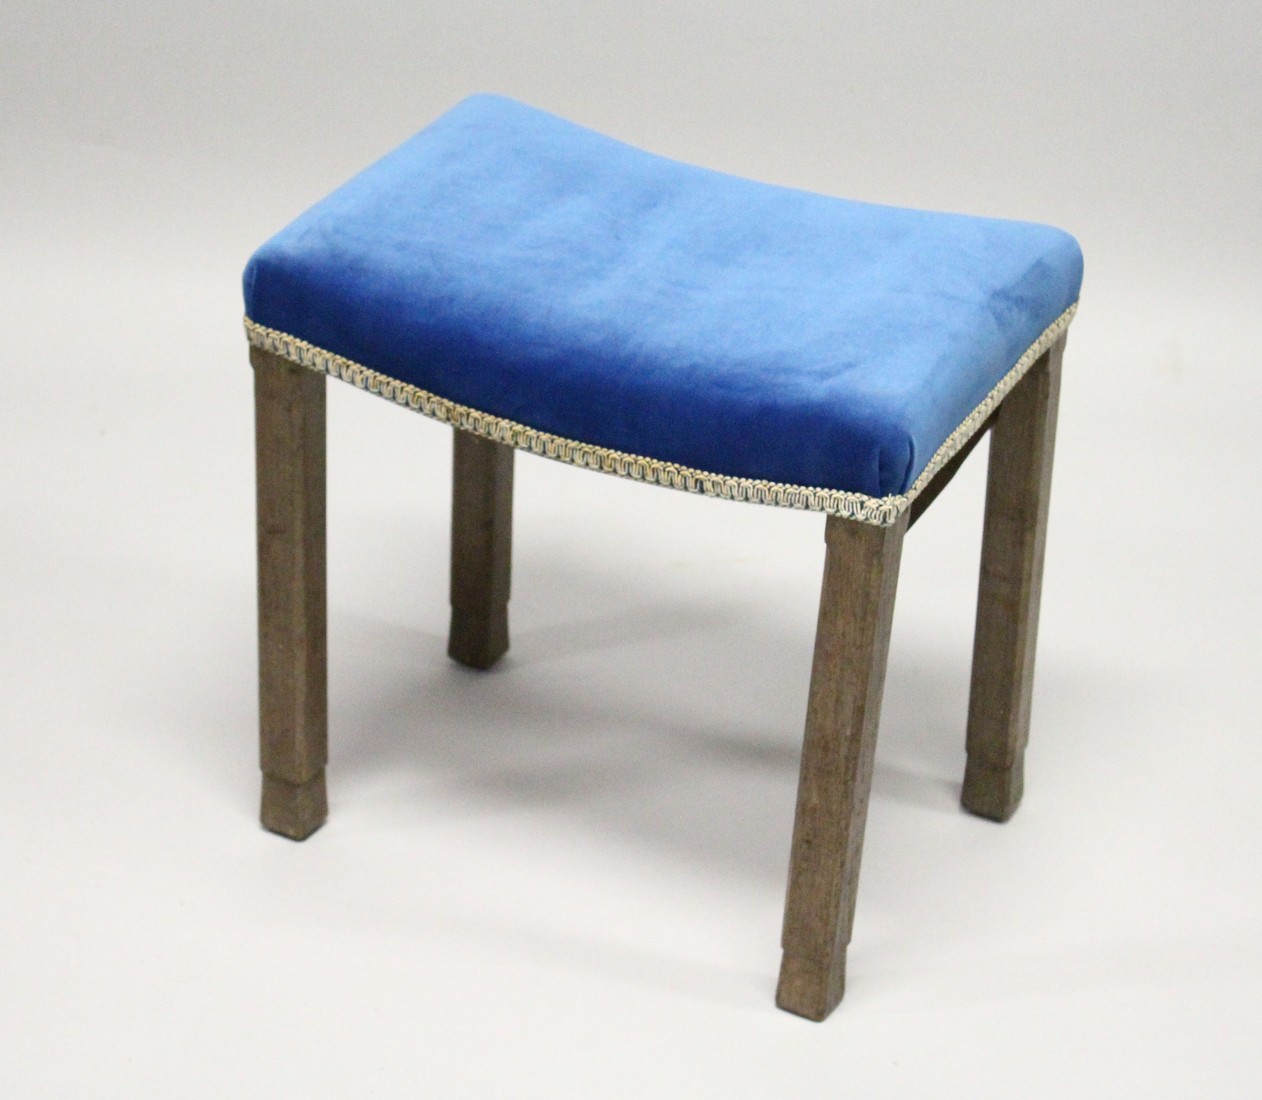 A GEORGE VI CORONATION STOOL with blue velvet seat by B North & Son. 1ft 8ins high, 1ft 3ins deep